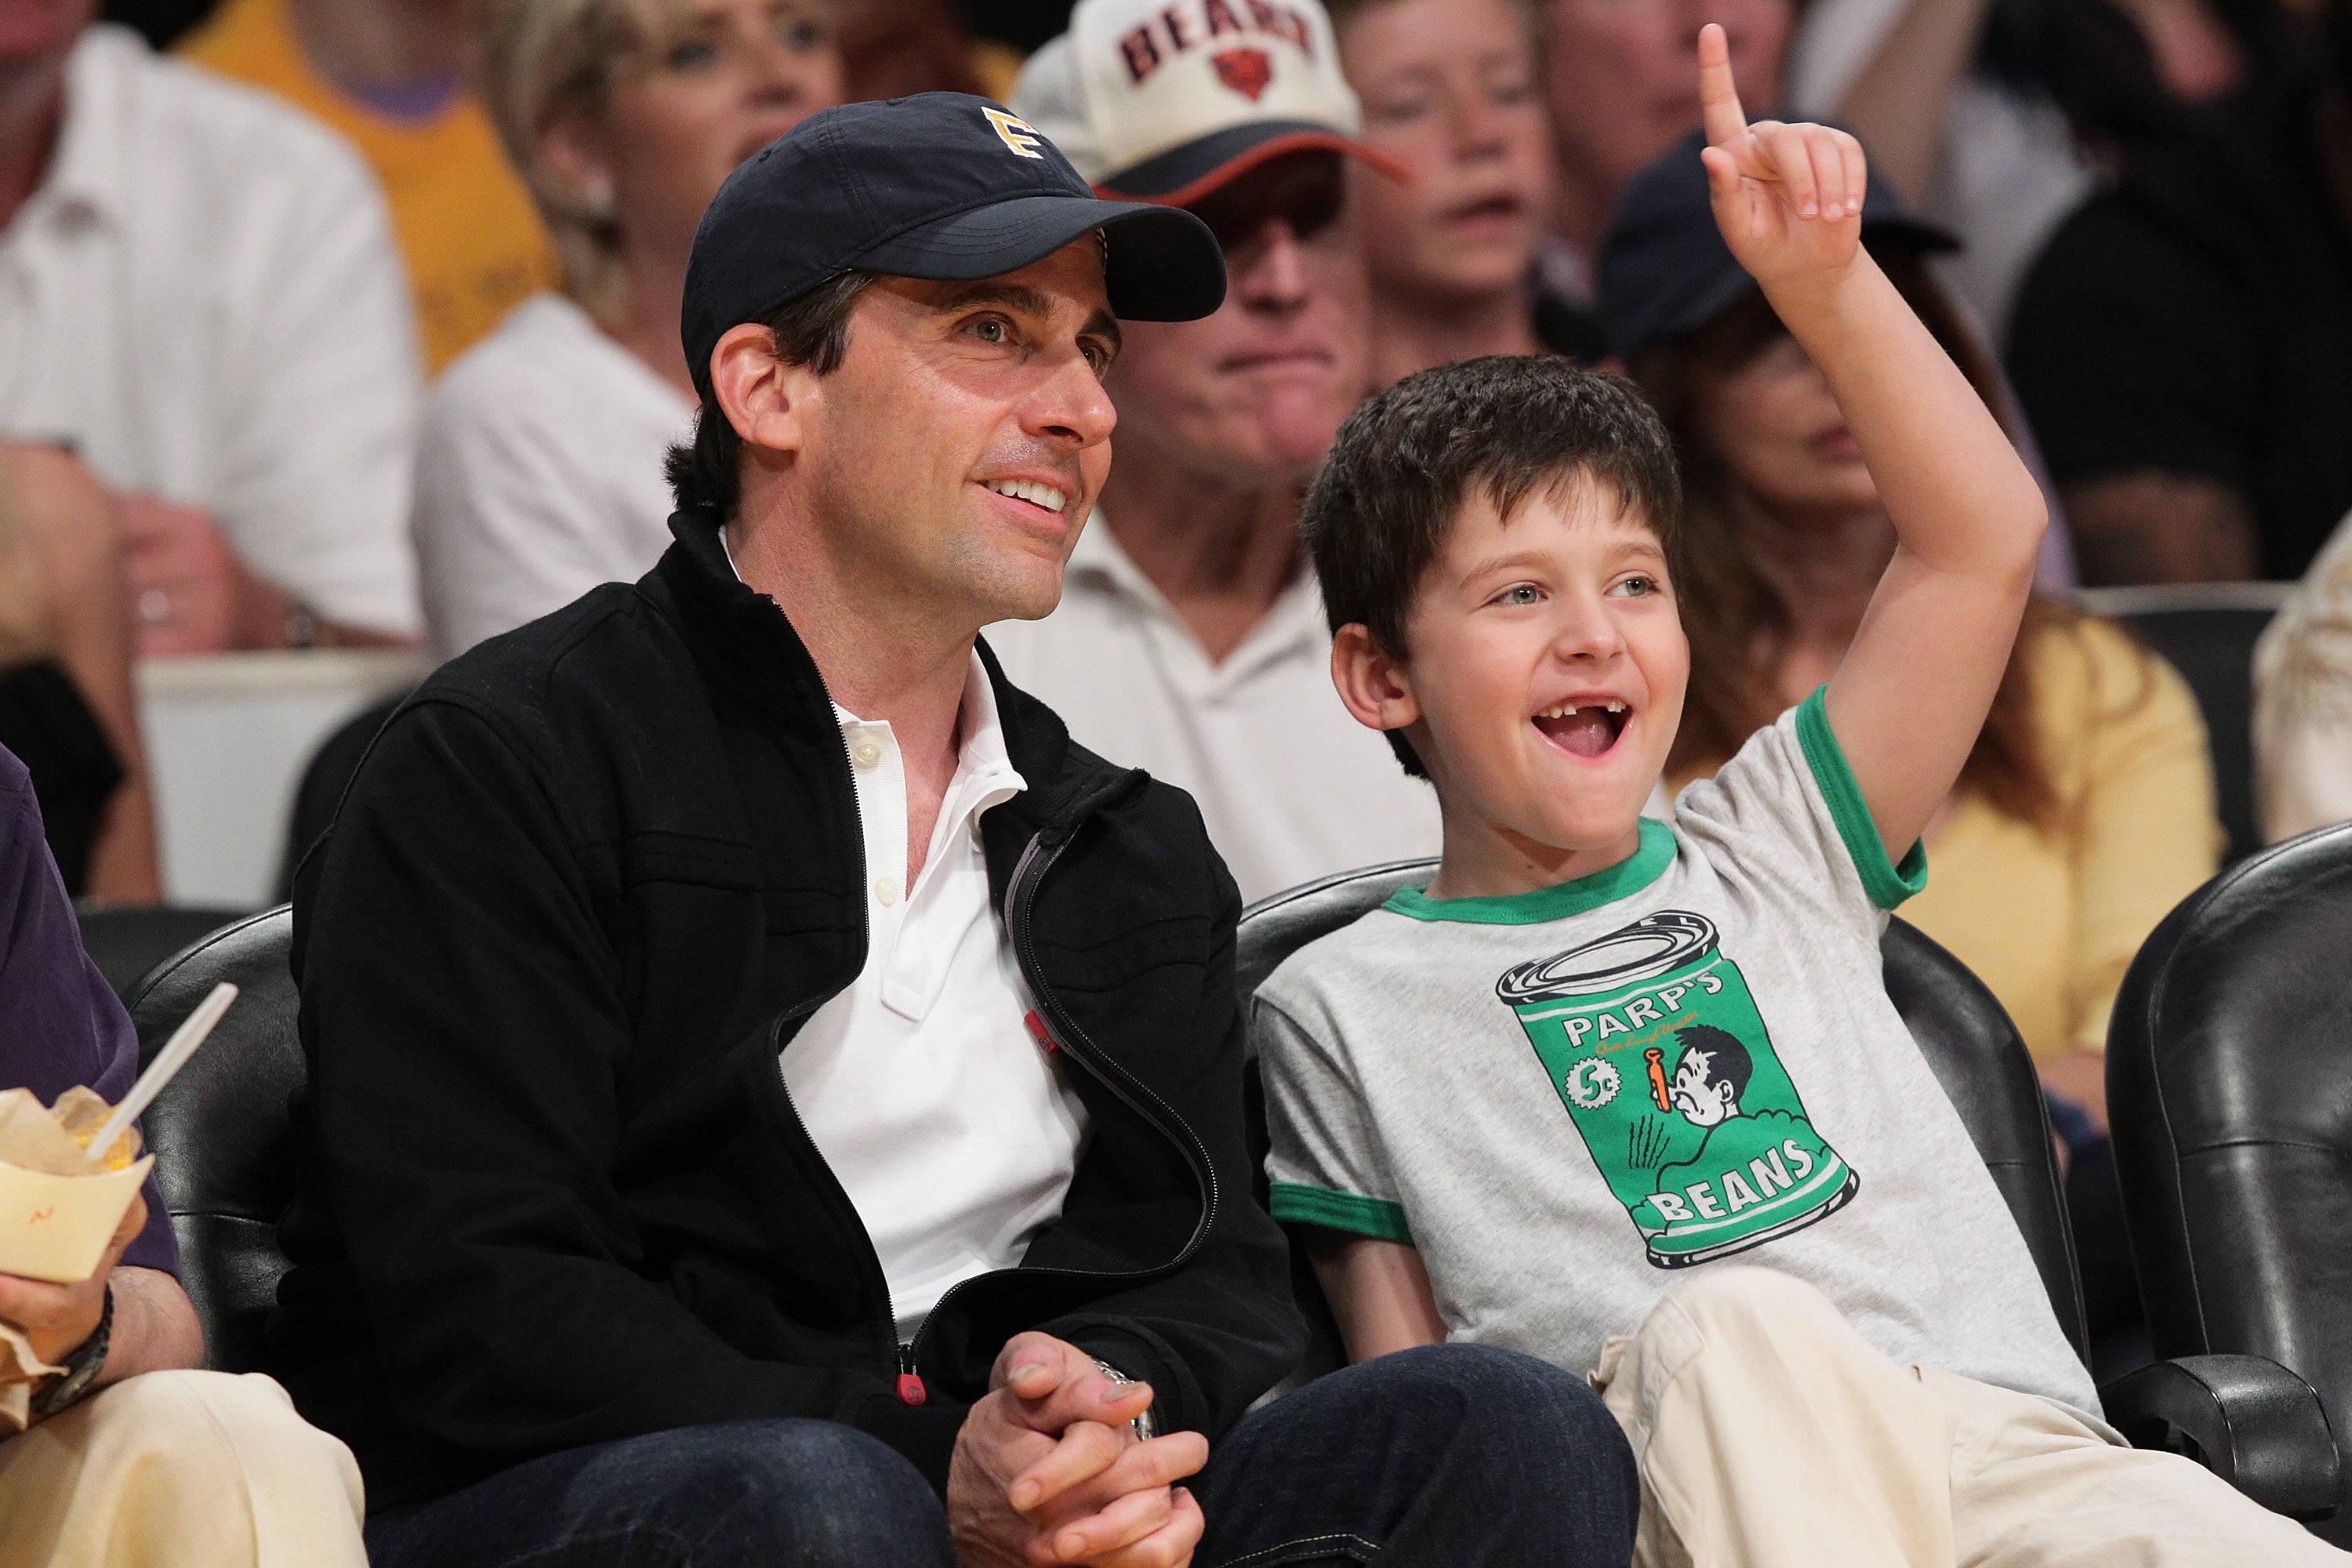 Steve Carell and his son John Carell at the game between the New Orleans Hornets and the Los Angeles Lakers on April 17, 2011, in Los Angeles. | Source: Getty Images